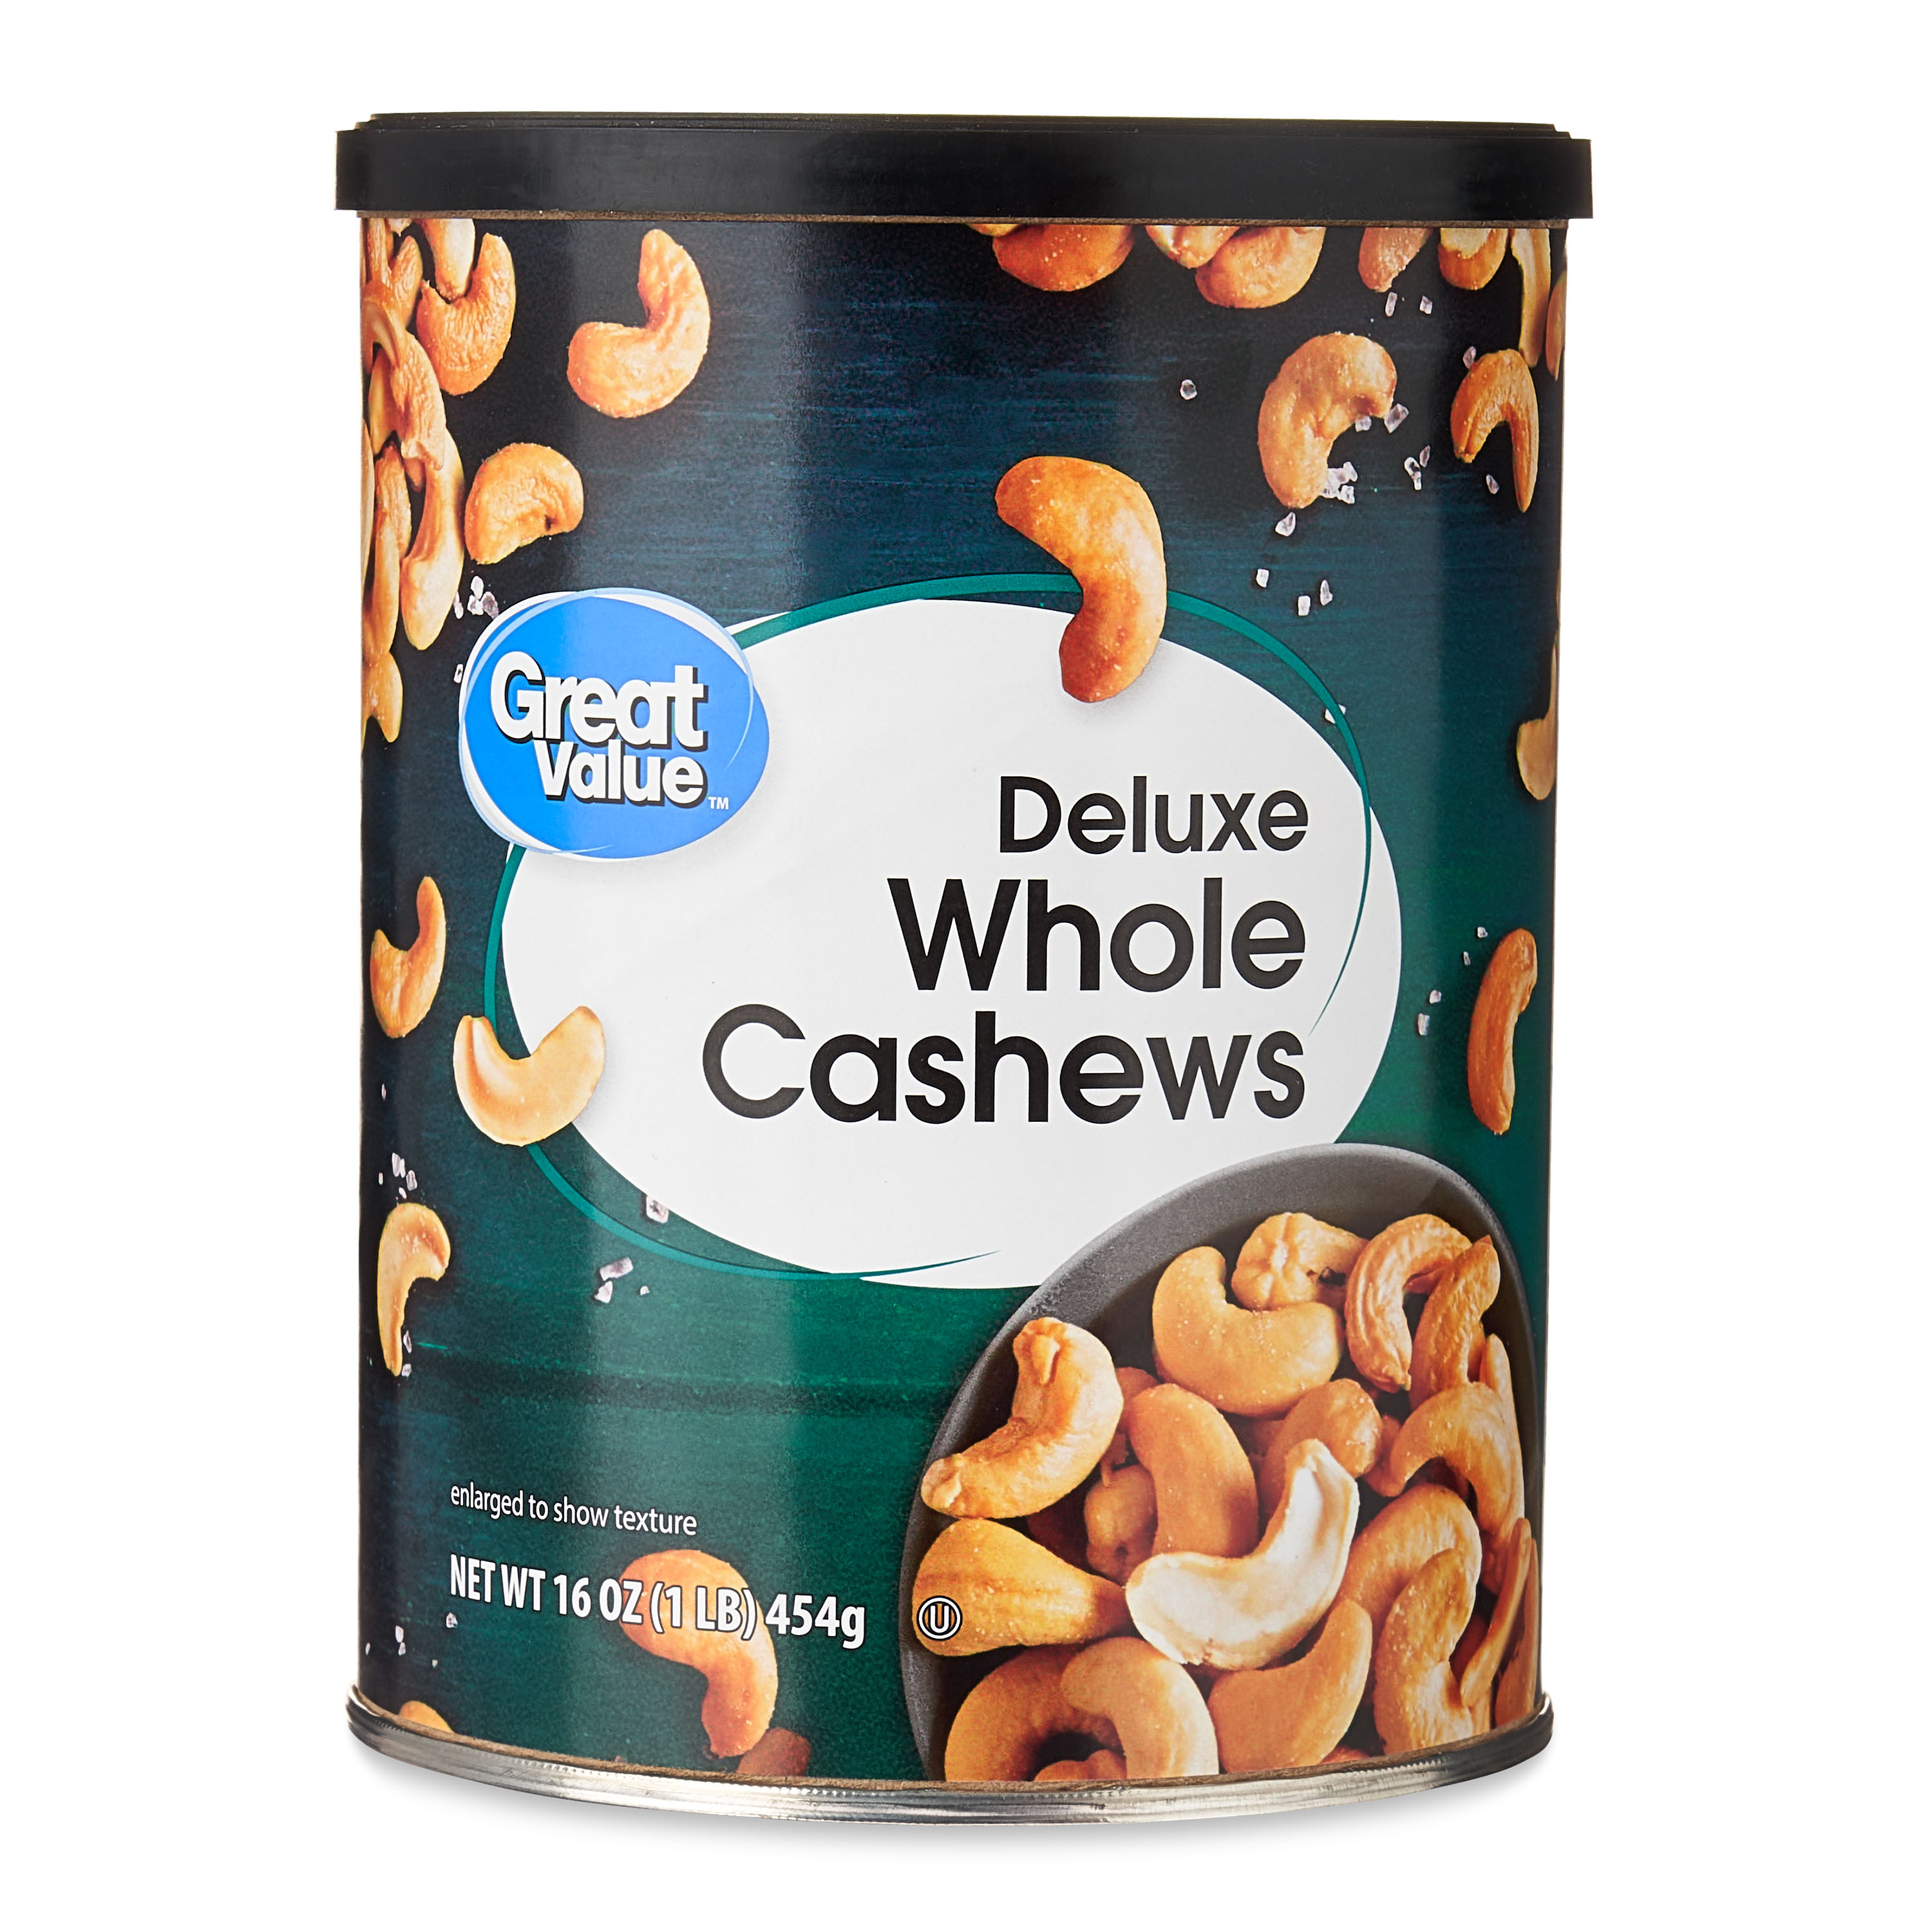 Great Value Deluxe Whole Cashews, Salted, 16 oz - image 1 of 8